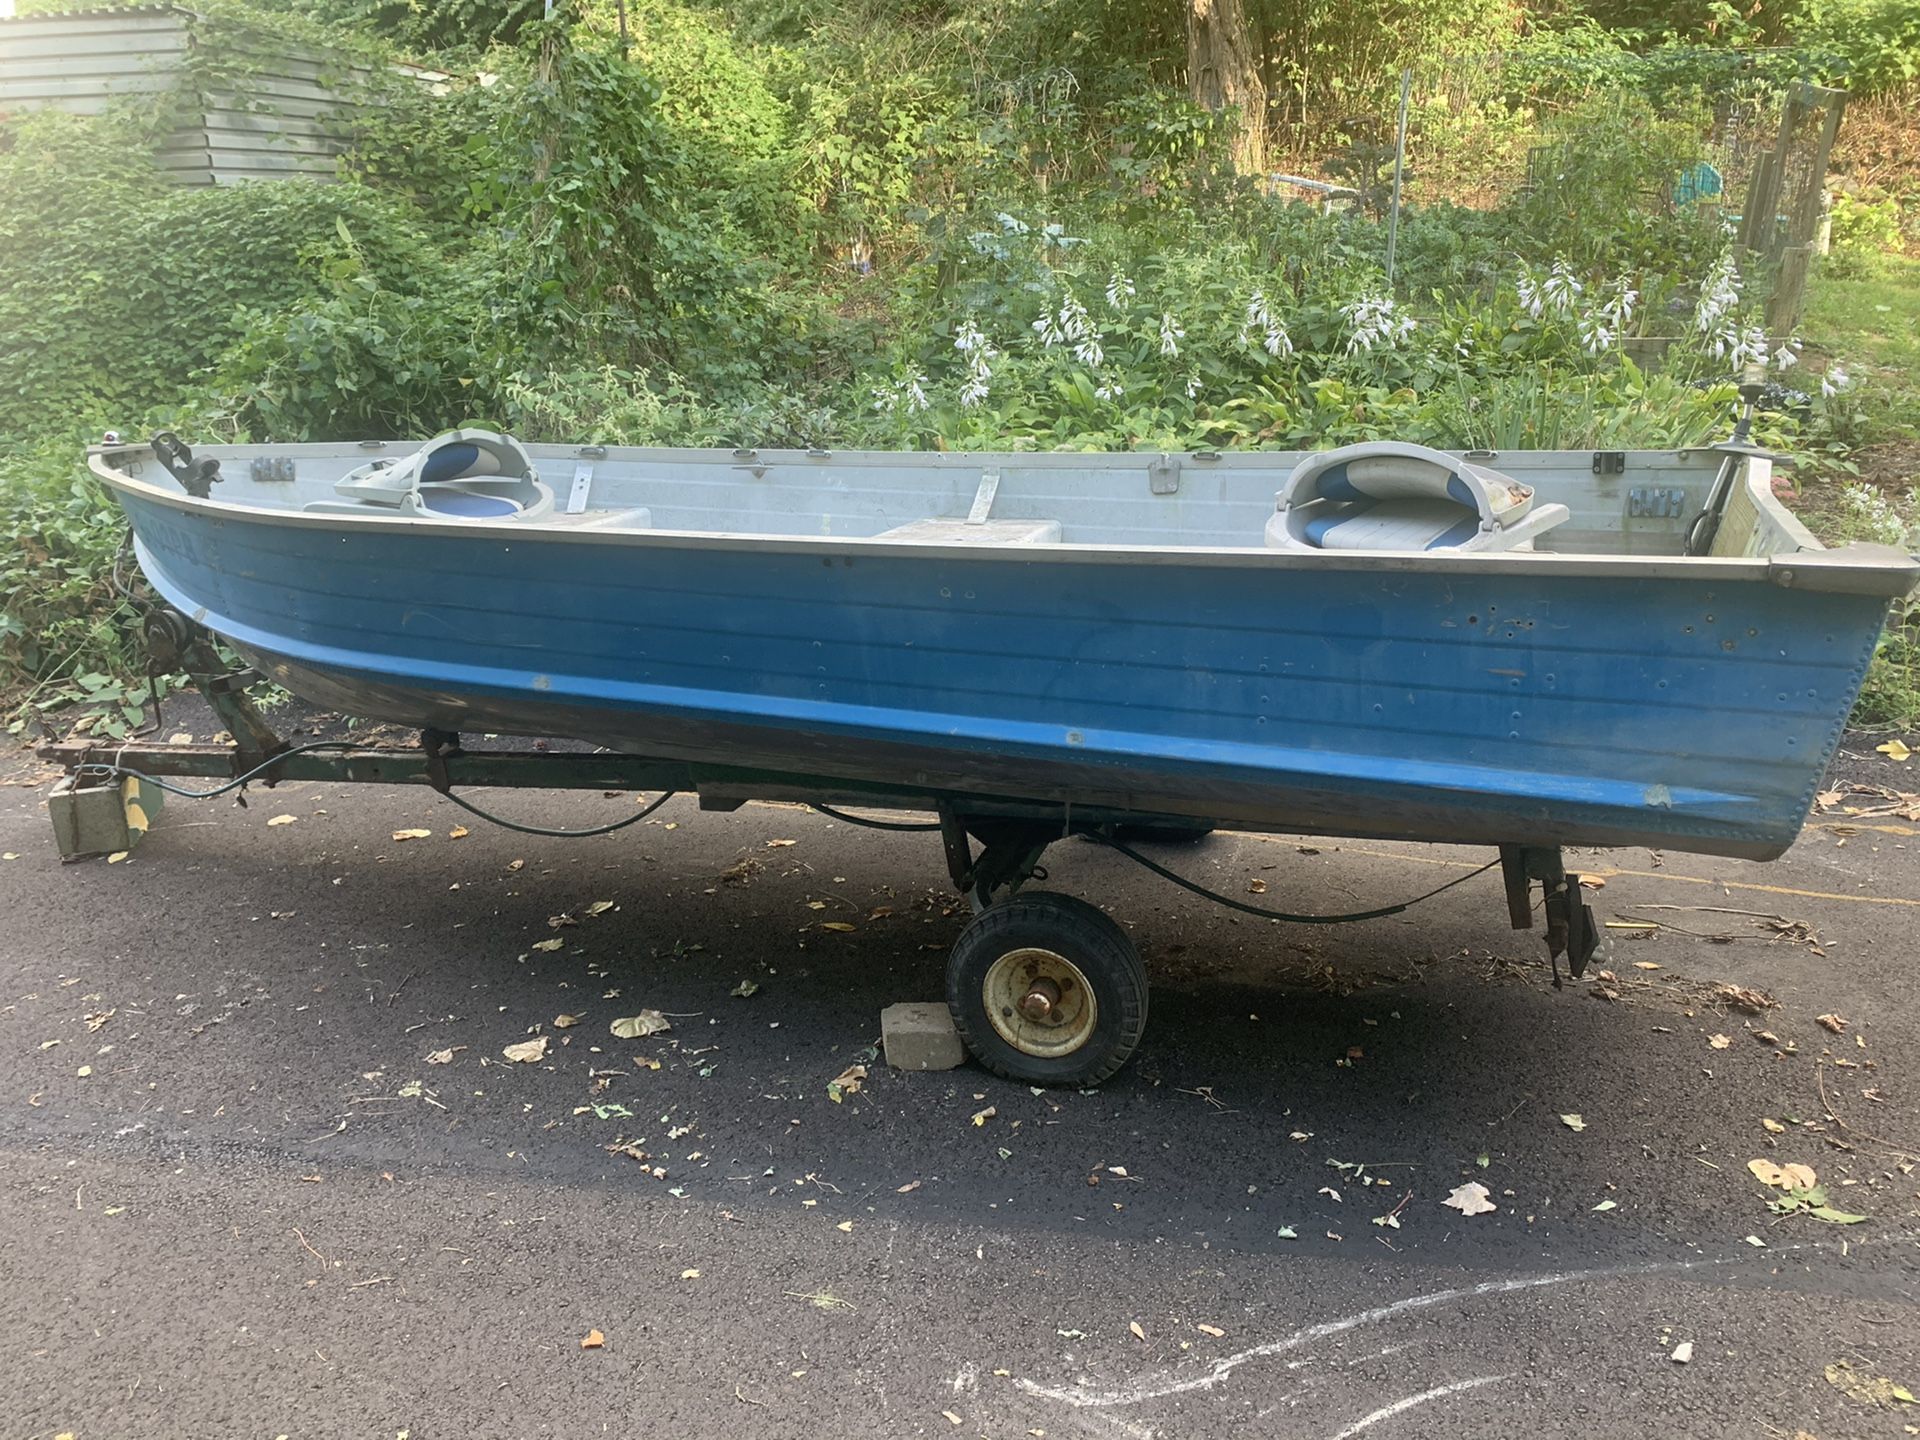 14 foot aluminum boat and trailer. I do NOT have titles for them.